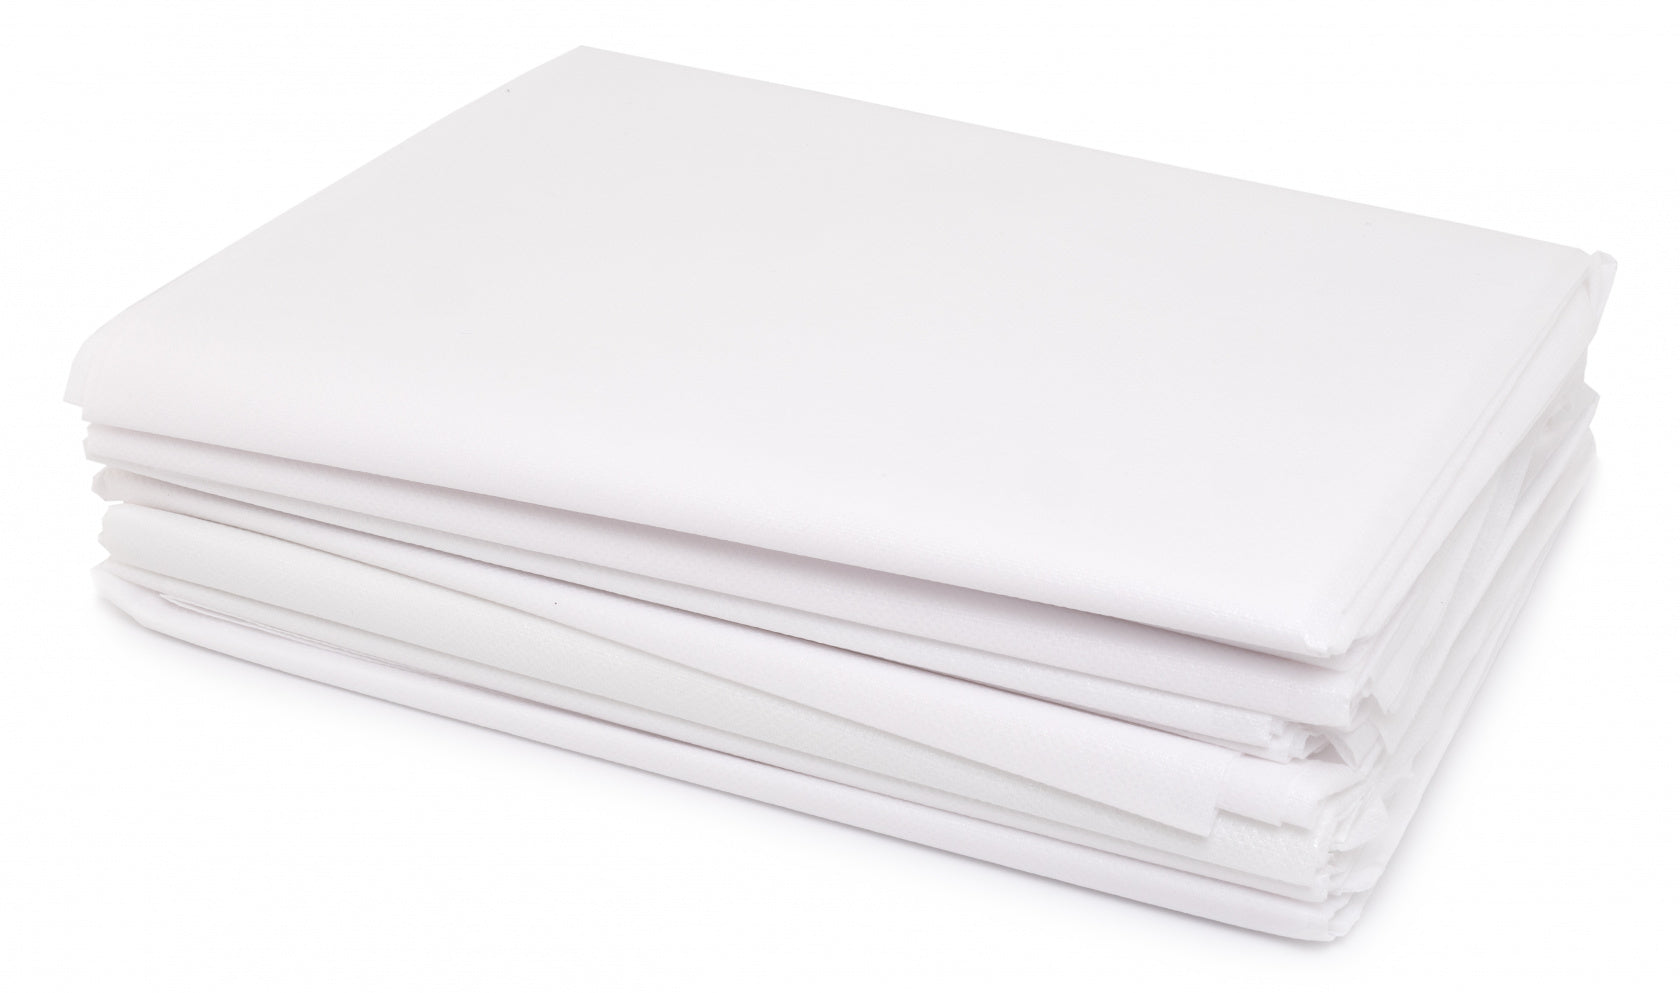 Medi-touch Linen Bed protector 30pc